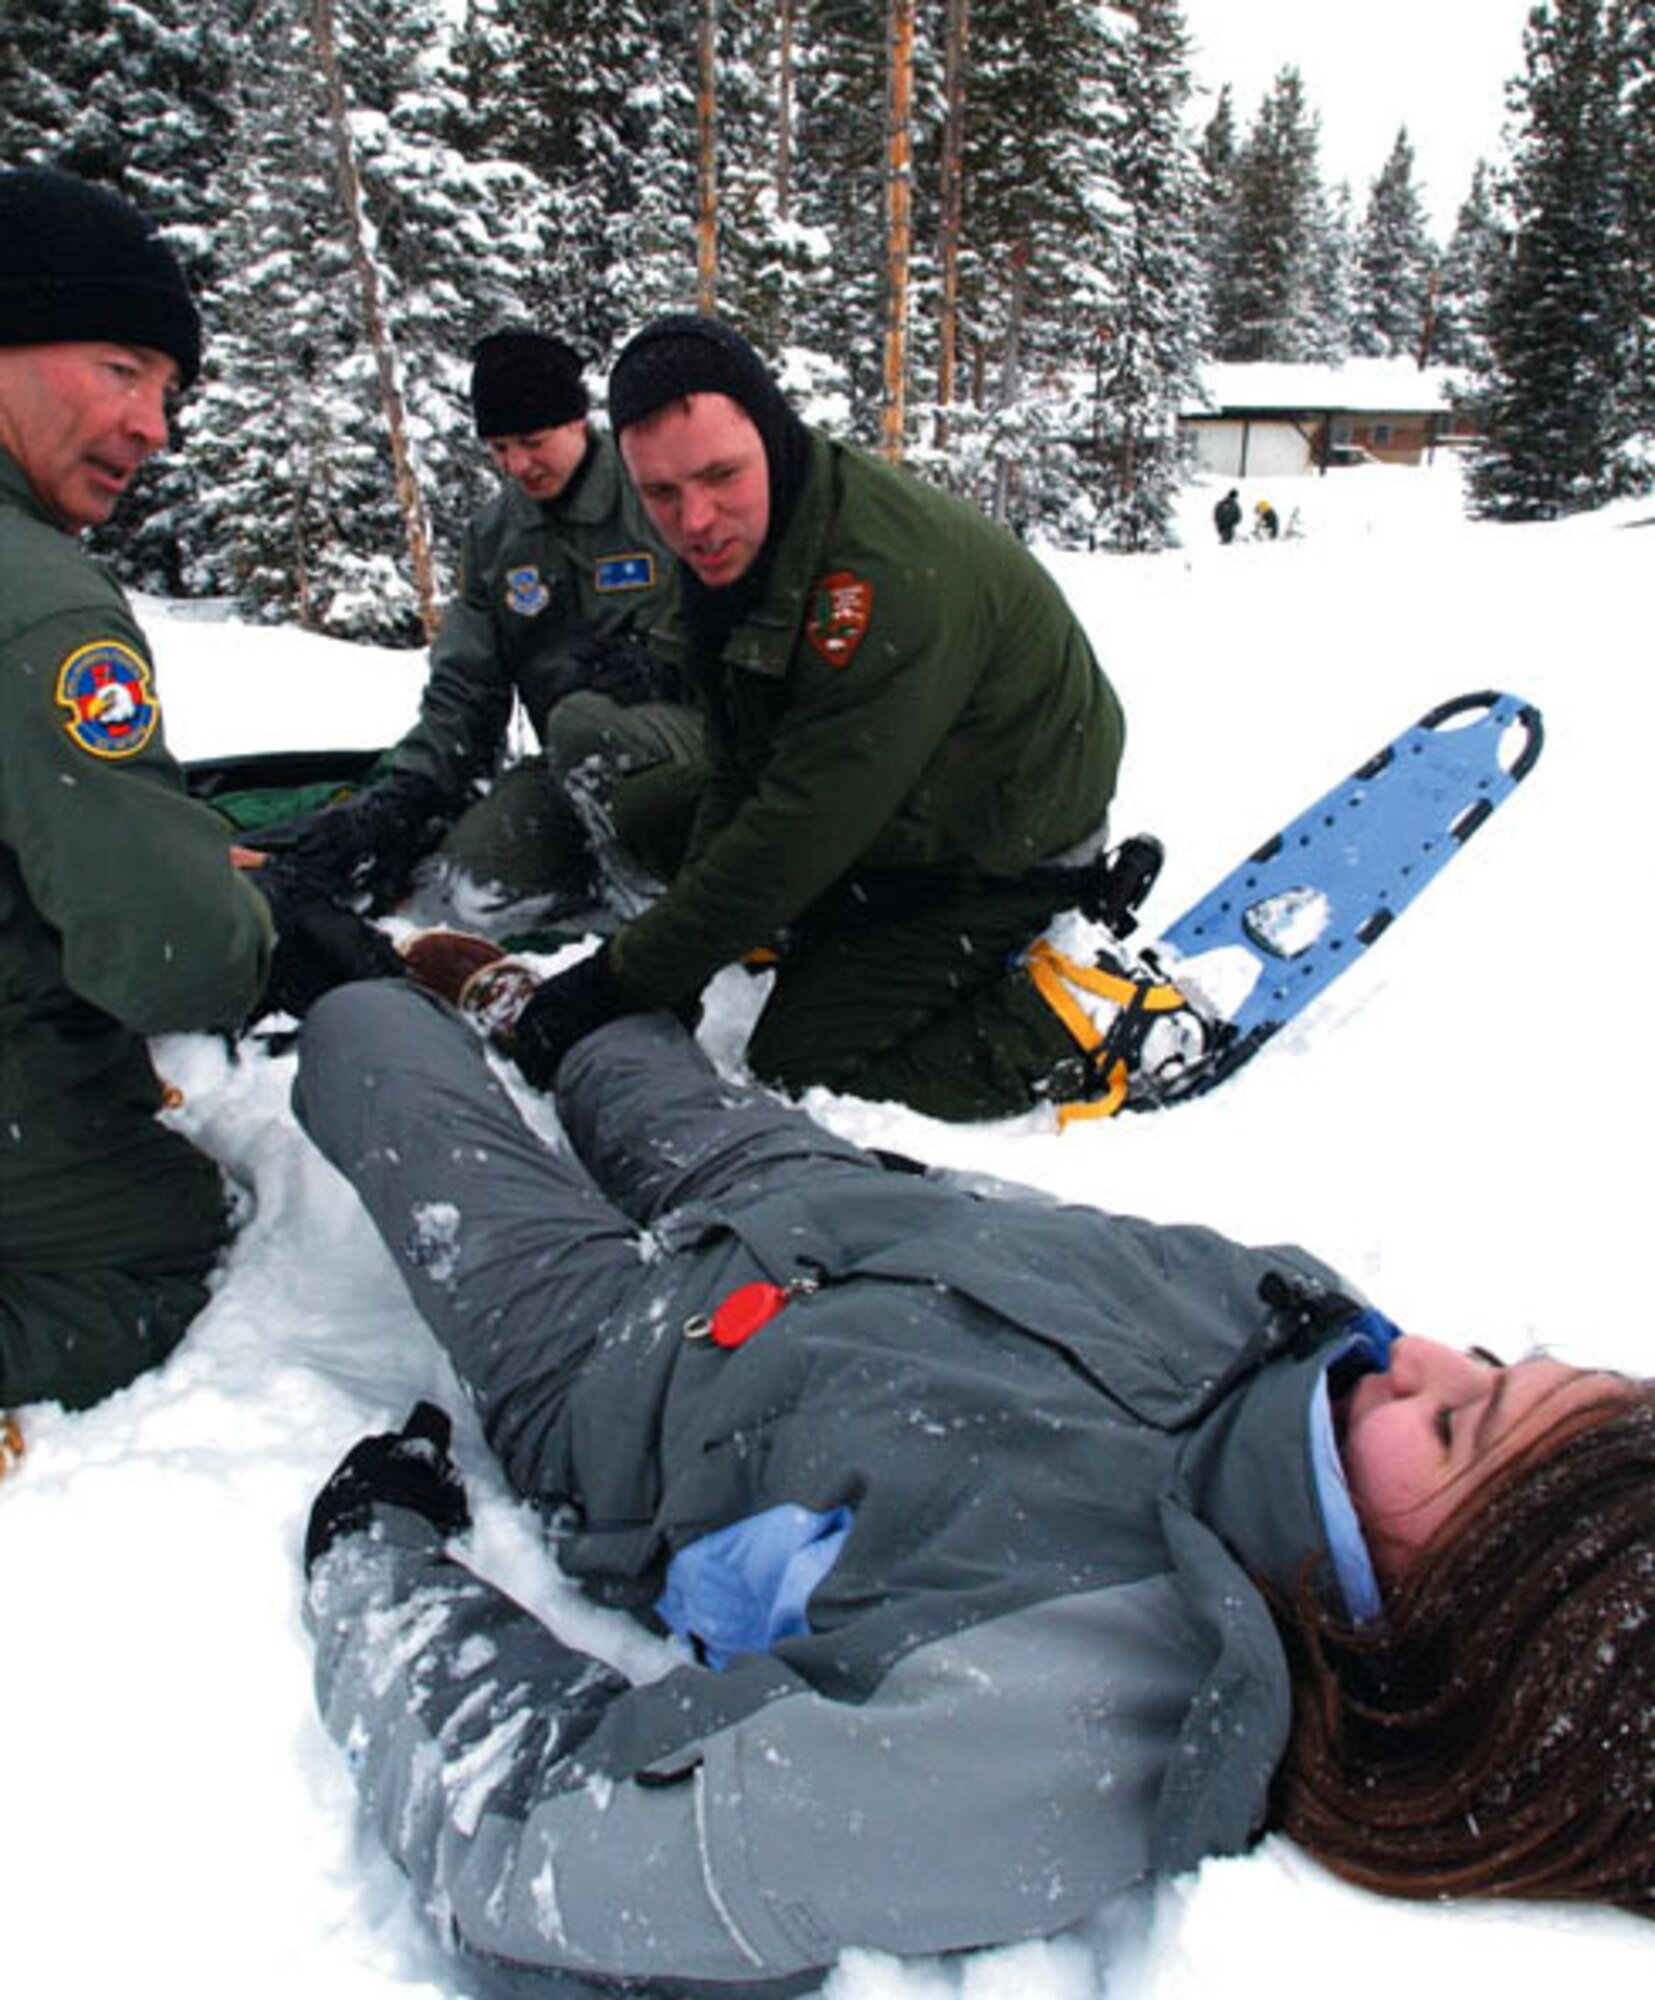 YELLOWSTONE NATIONAL PARK -- Senior Master Sgt. Johnny Cupp (left) and 1st Lt. Stacy Gartrell, officer in charge of the 445th Aeromedical Staging Squadron's National Park Service/EMT training program, assess a "patient's" injury with the help of park ranger Tim Townsend.  The airmen are here as part of a medical exercise called Winterops 2003.  (U.S. Air Force photo by Bo Joyner)